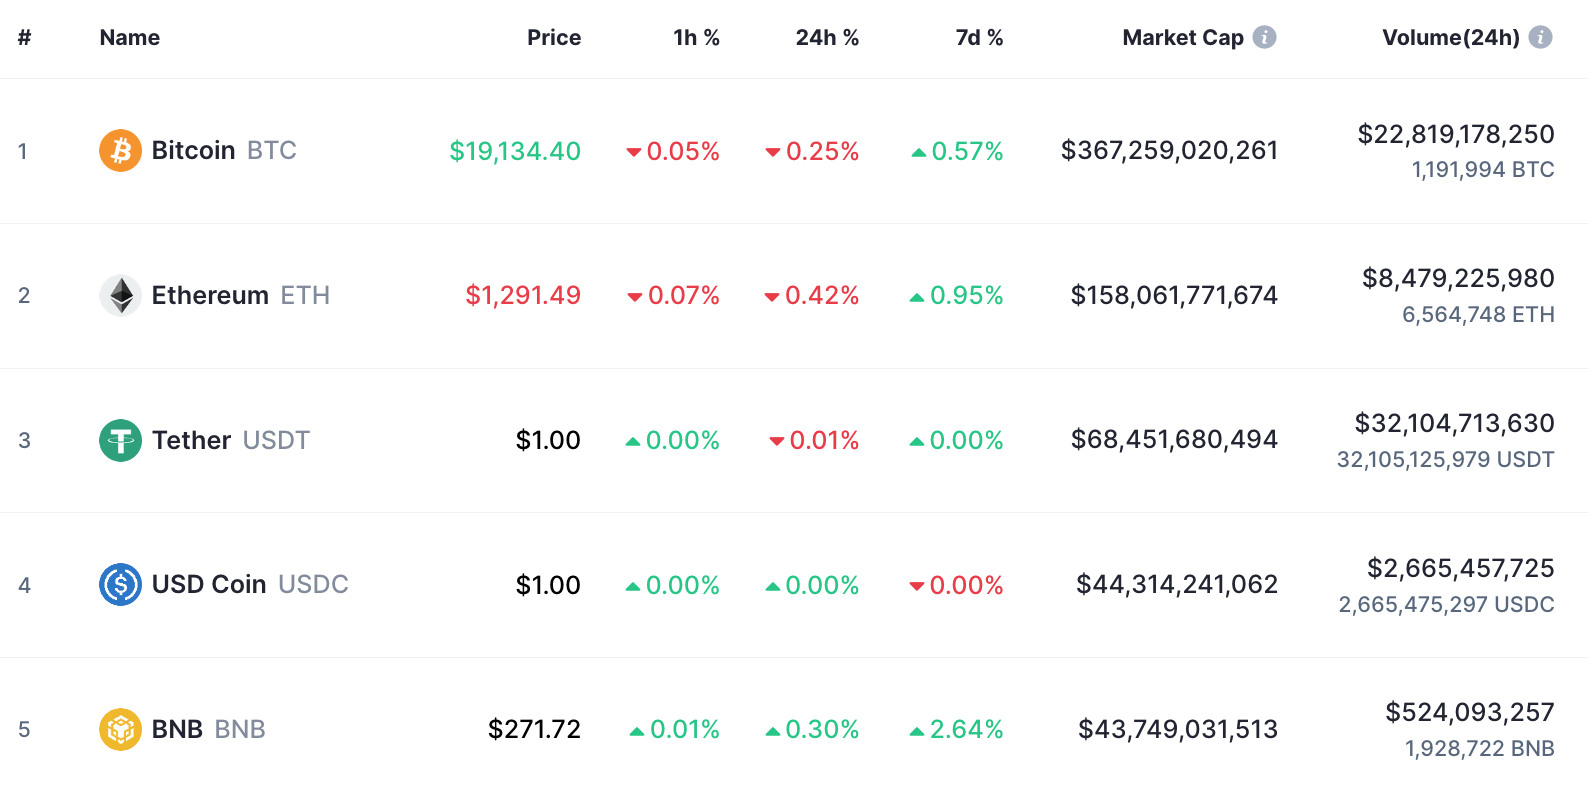 Top crypto assets by market cap